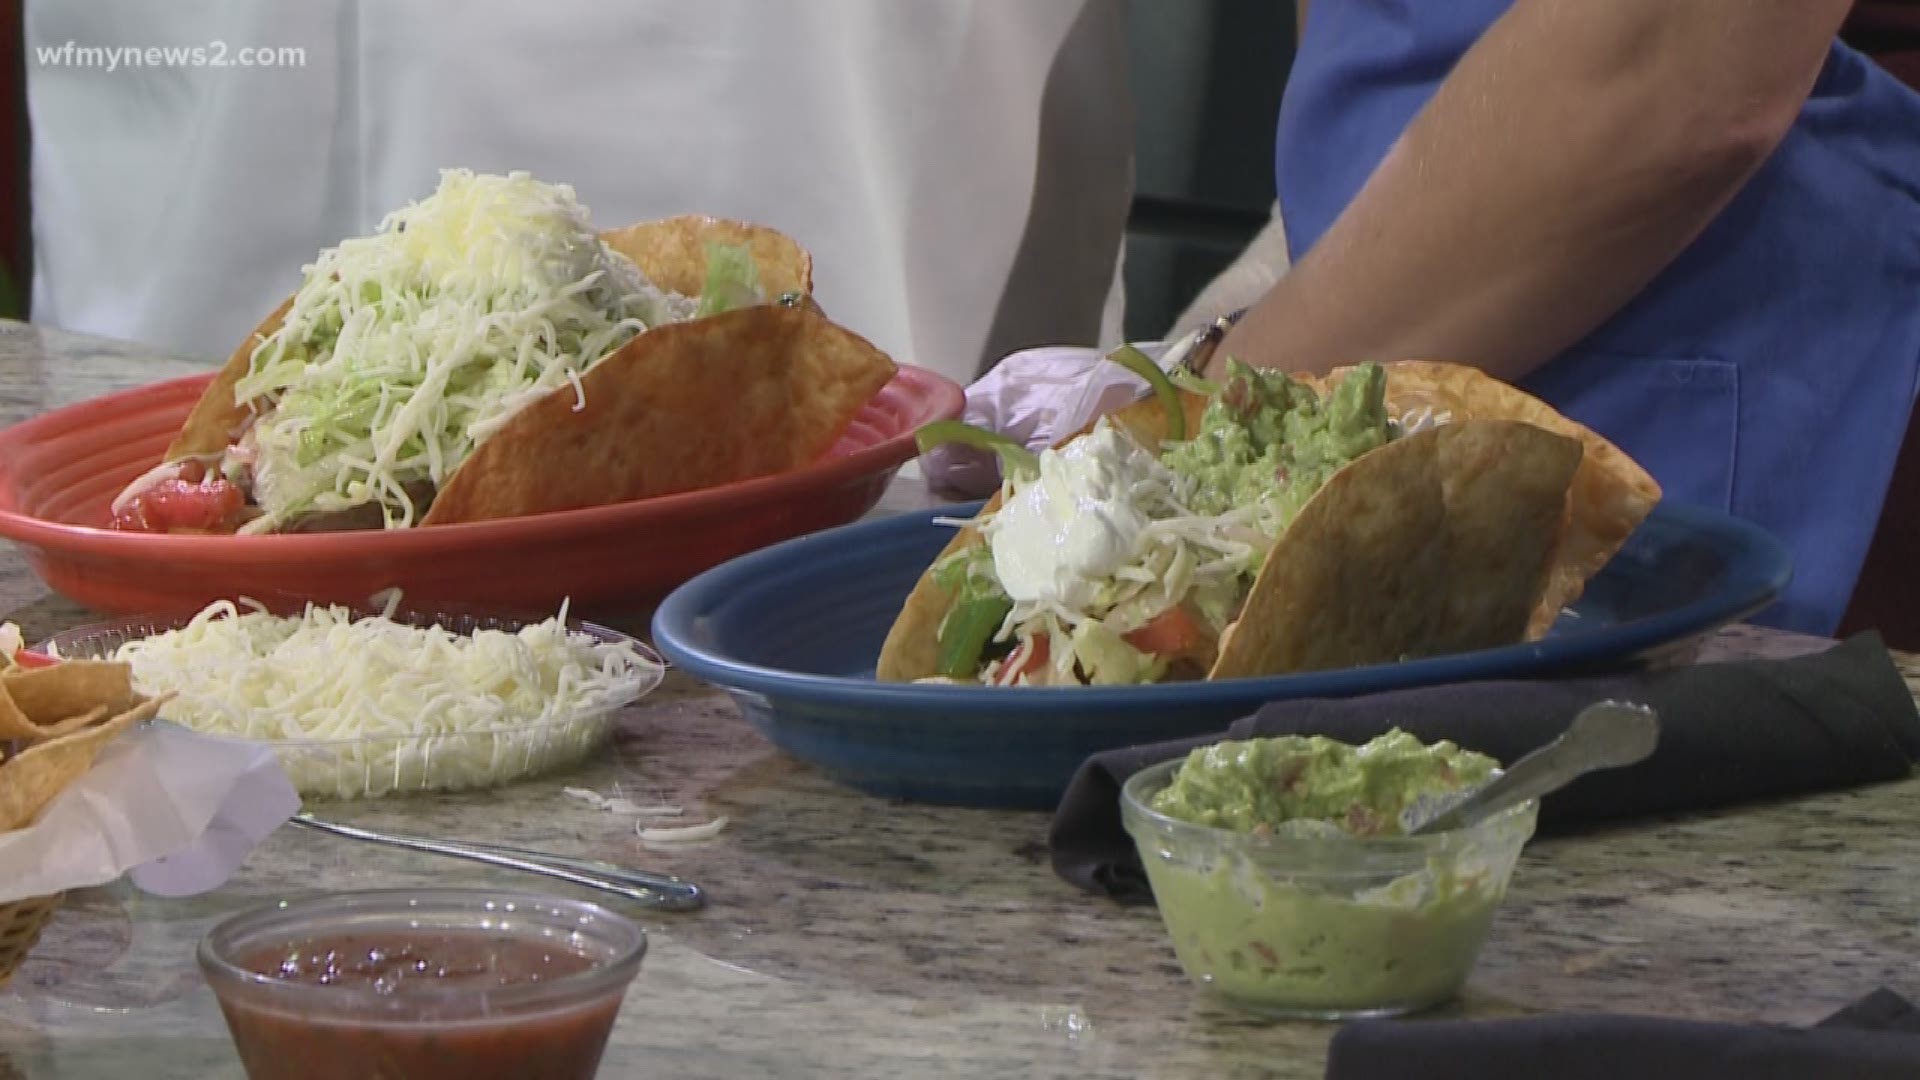 La Fiesta is back in the studio for two full days of recipes!